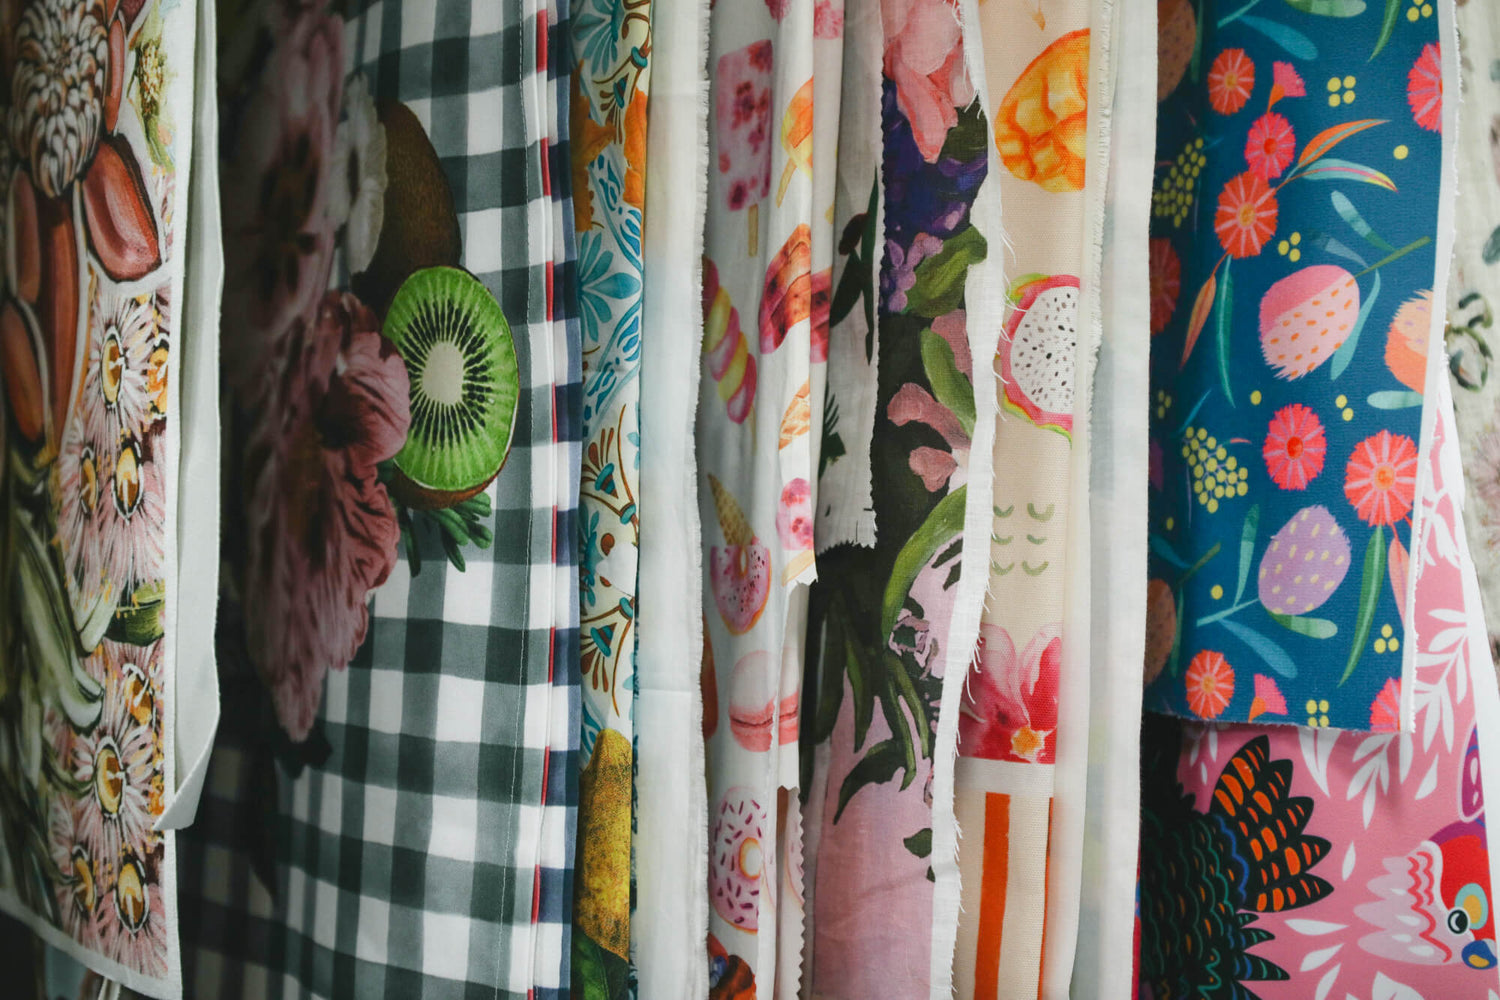 bright fabric with prints by various artists and creatives hanging